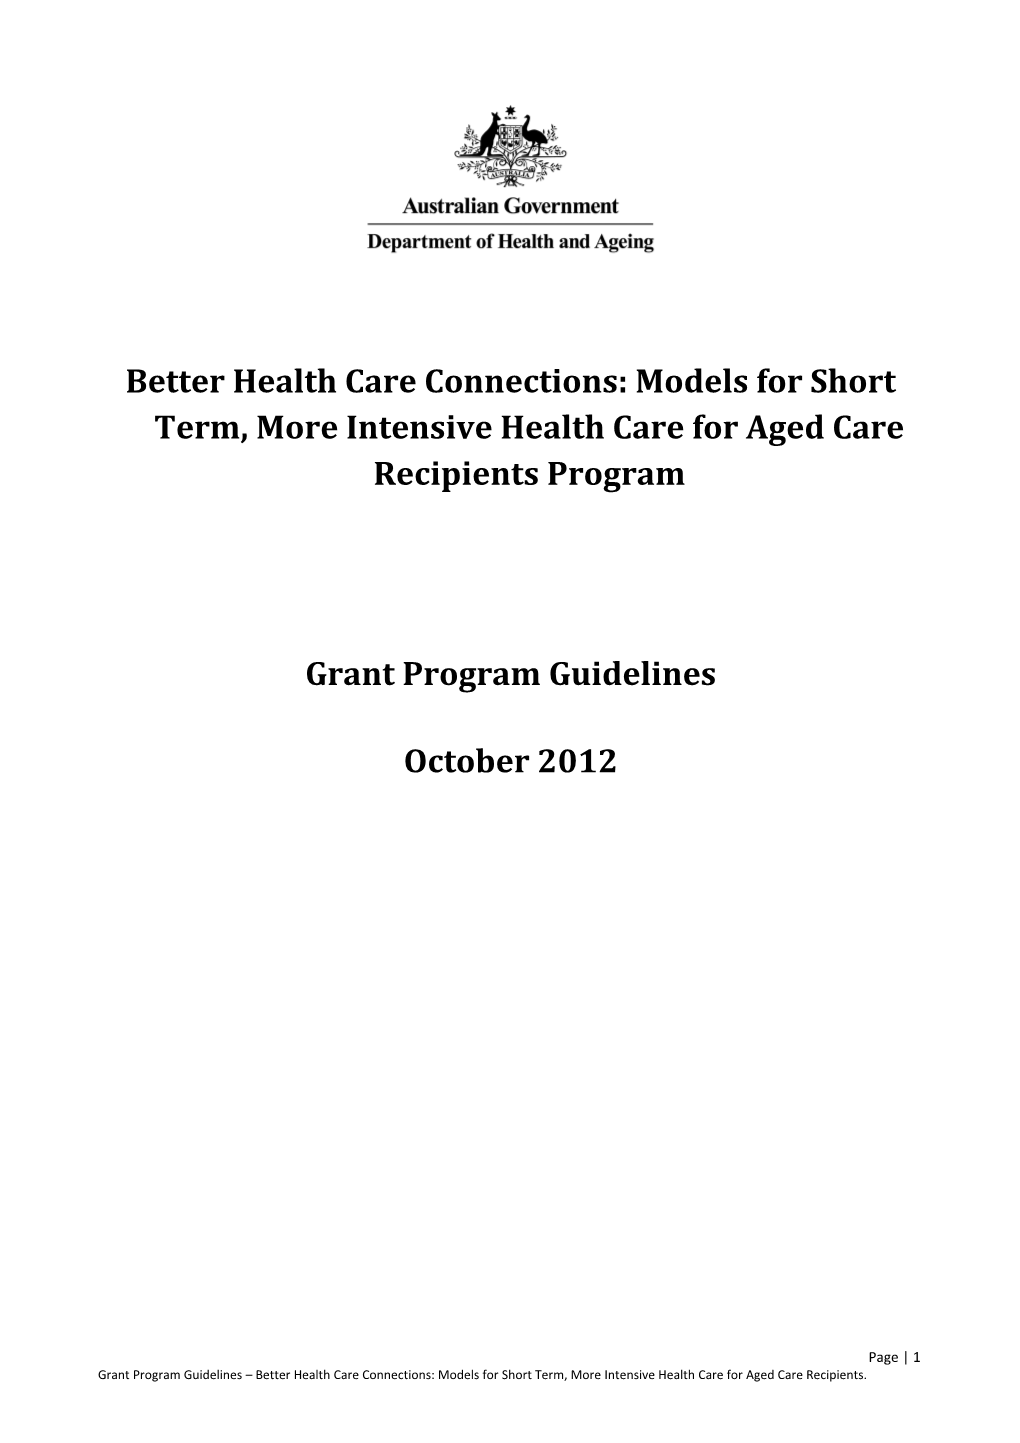 Better Health Care Connections: Models for Short Term, More Intensive Health Care for Aged